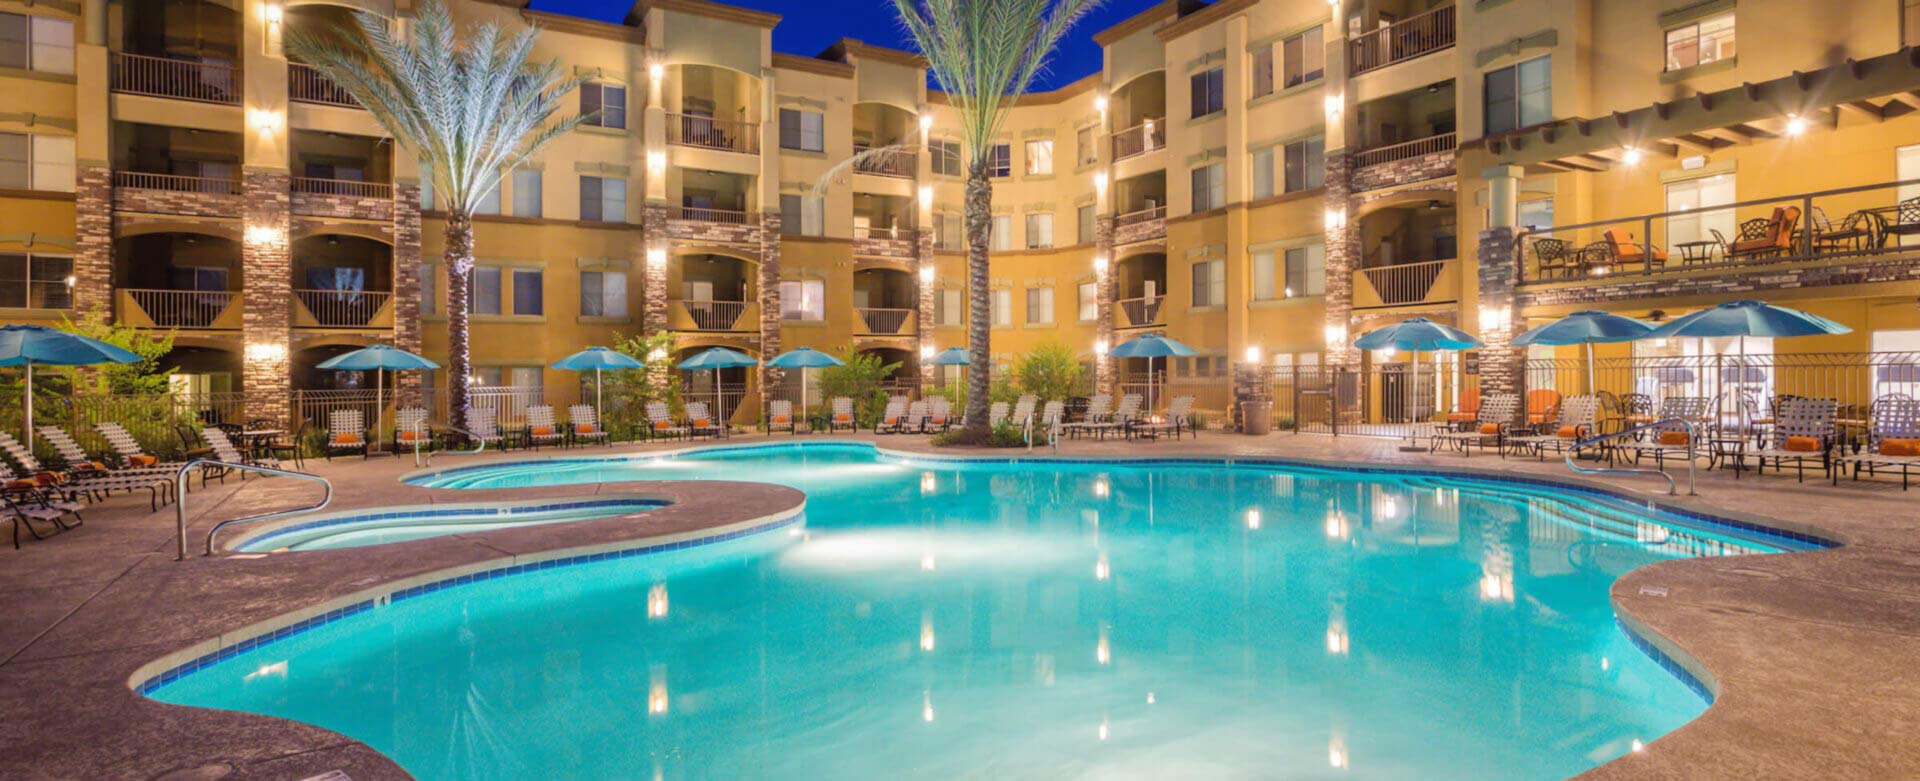 Phoenix Condos - picture of outdoor pool and pretty lighting at Toscana of Desert Ridge